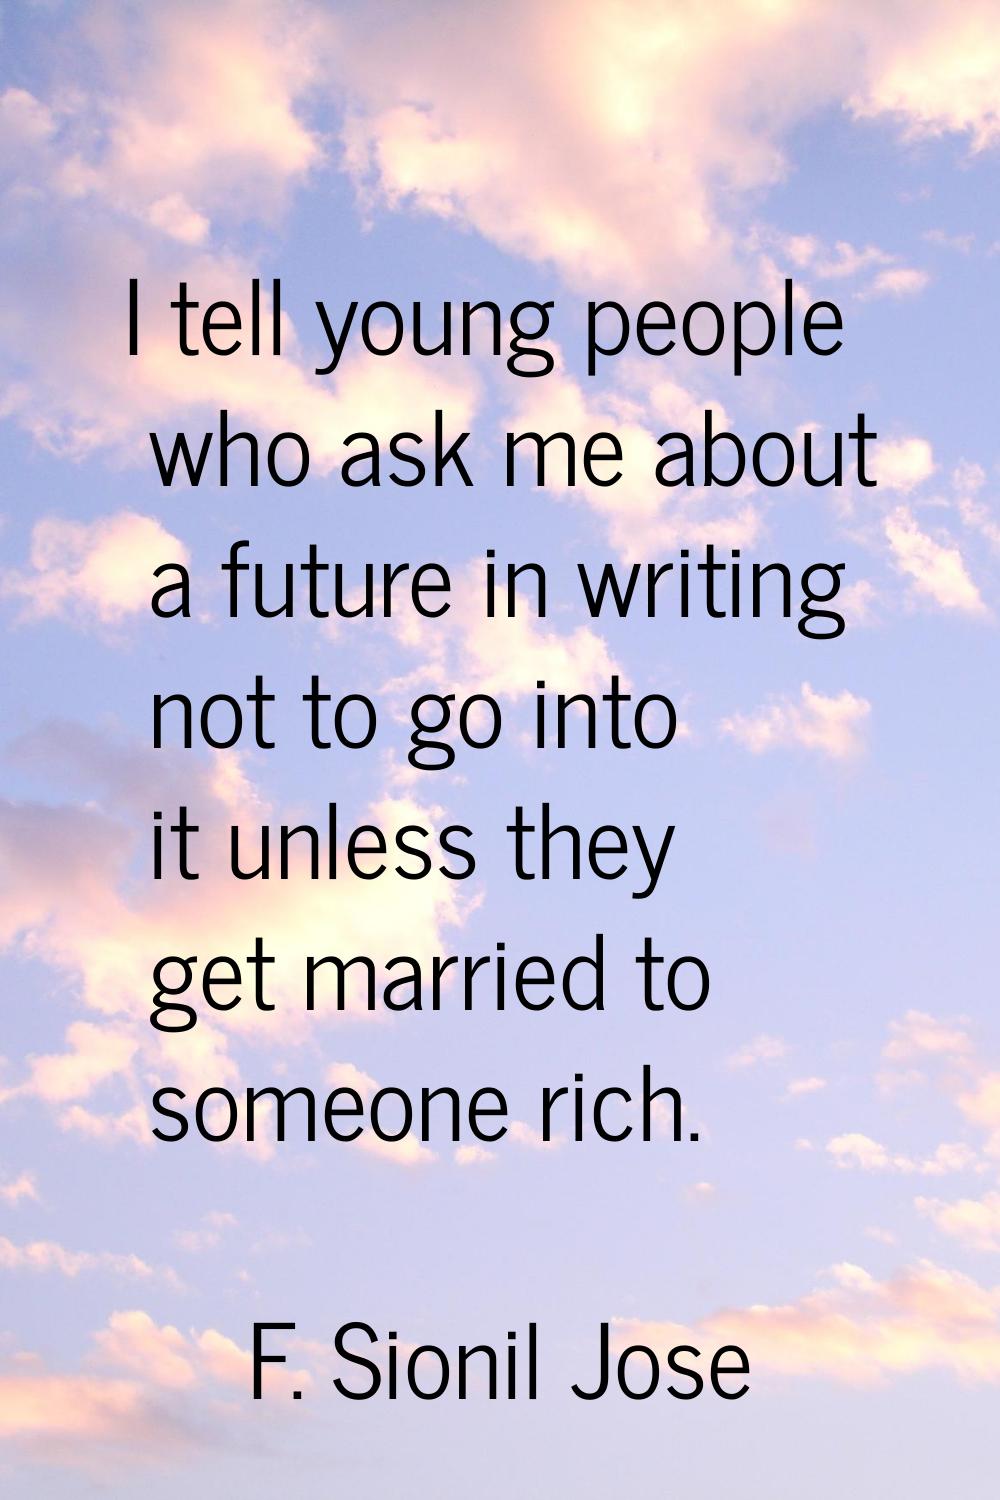 I tell young people who ask me about a future in writing not to go into it unless they get married 